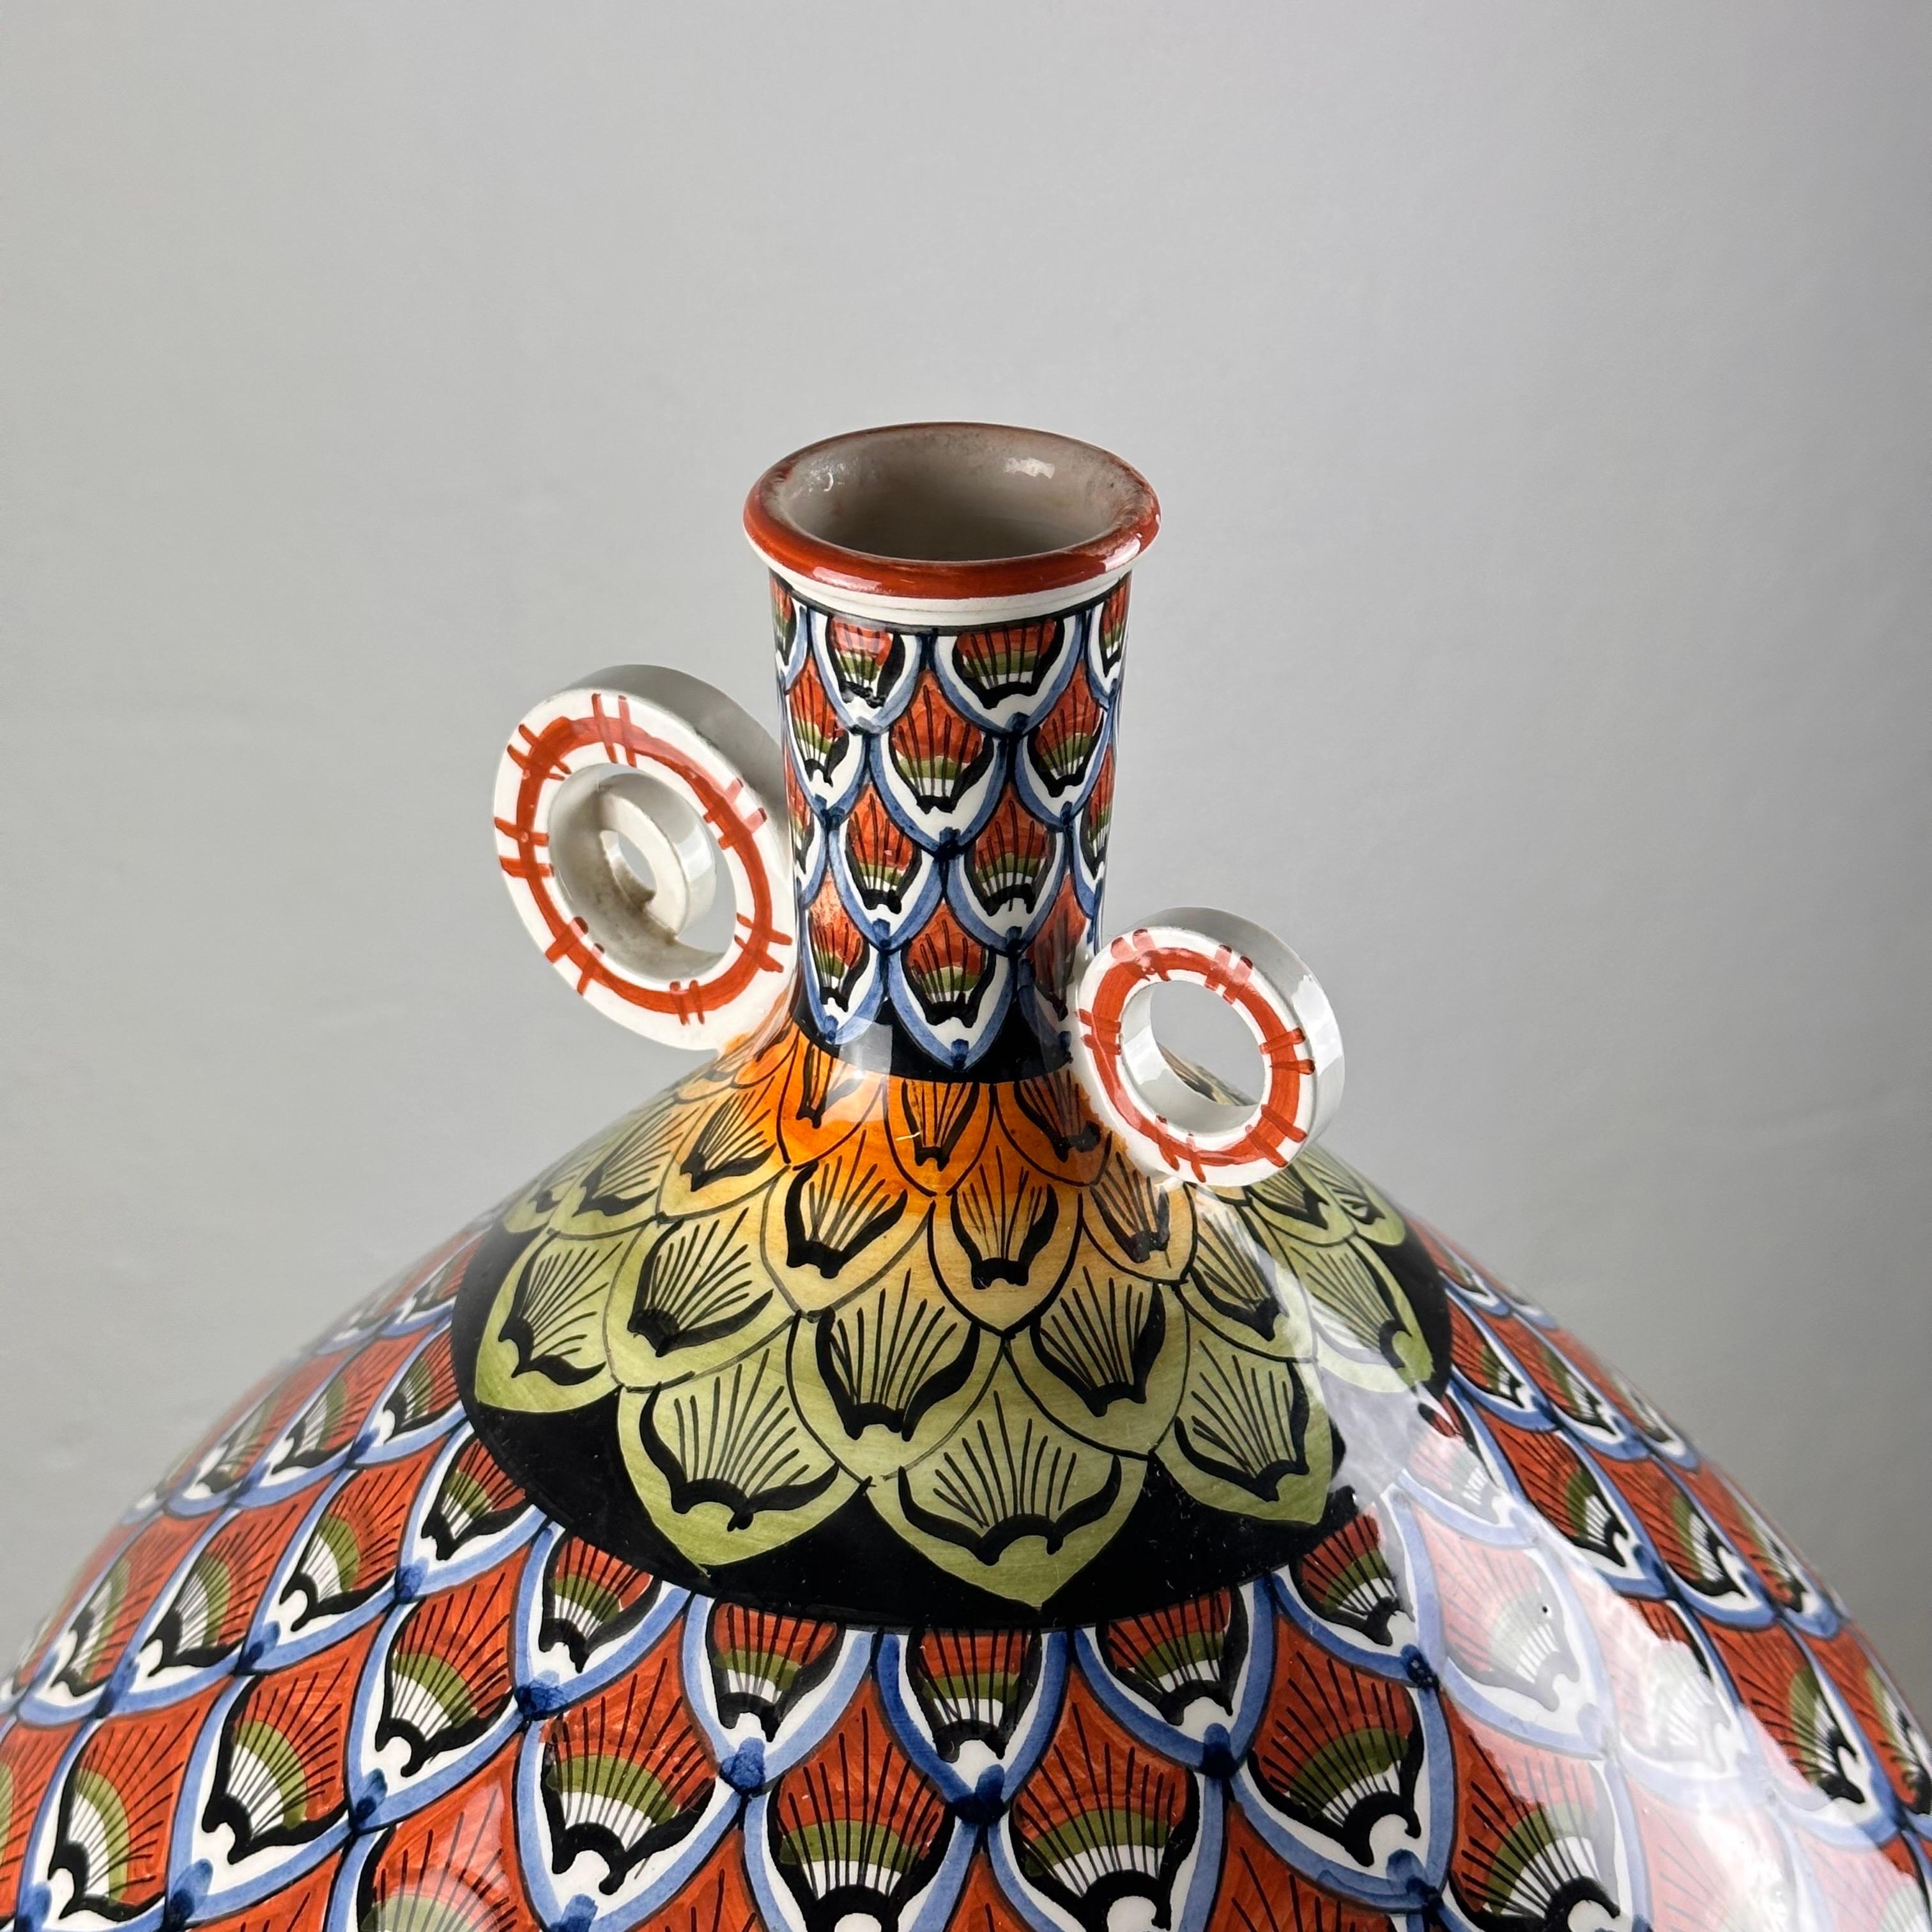 Italian Vintage 1970s Hand-Painted Ceramic Vase - A Burst of Colorful Delight For Sale